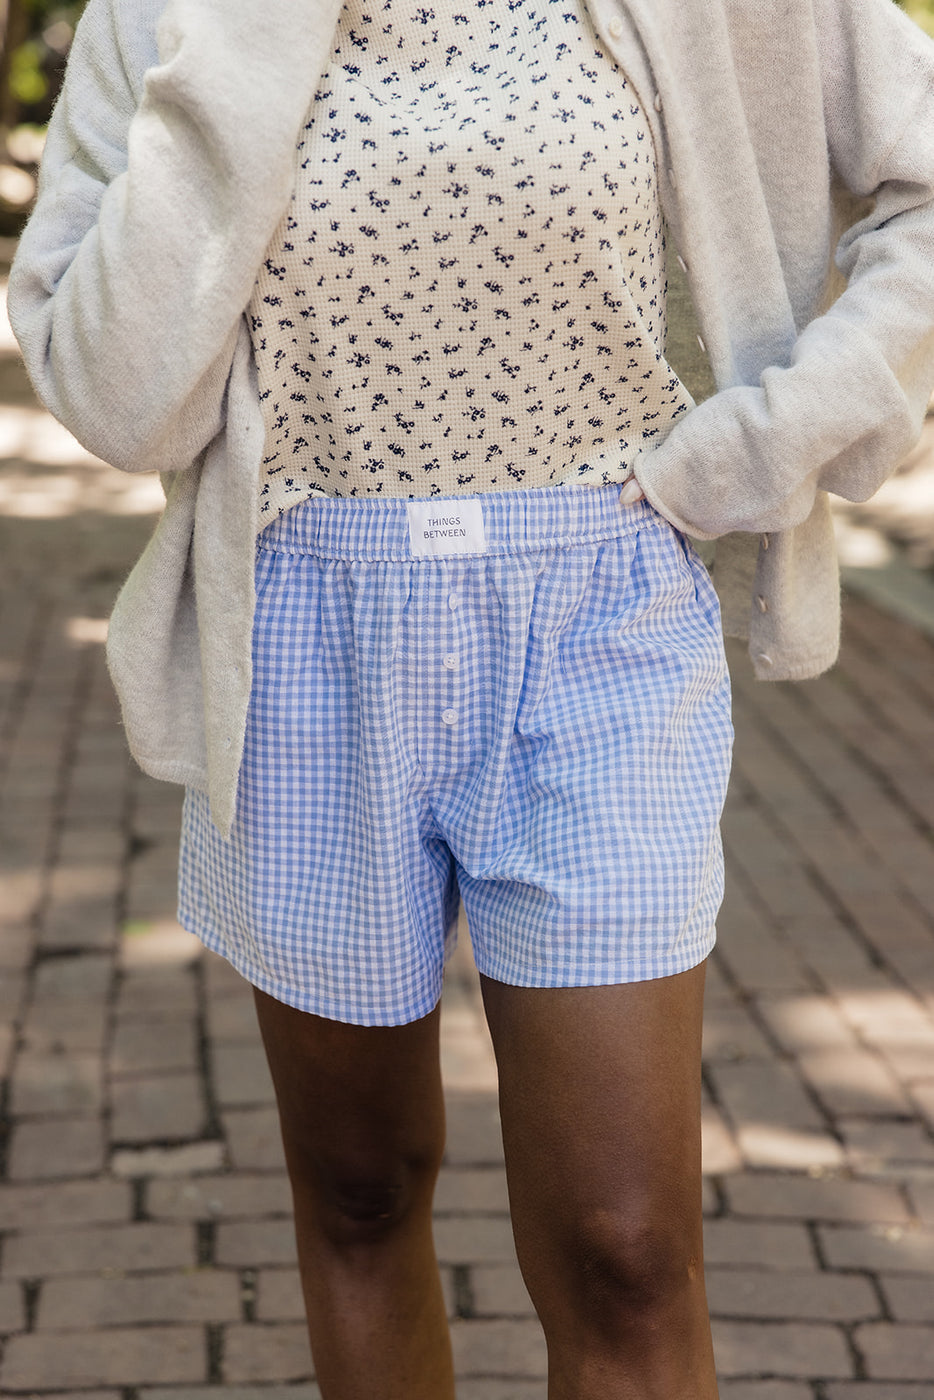 a person wearing a pair of blue and white checkered shorts